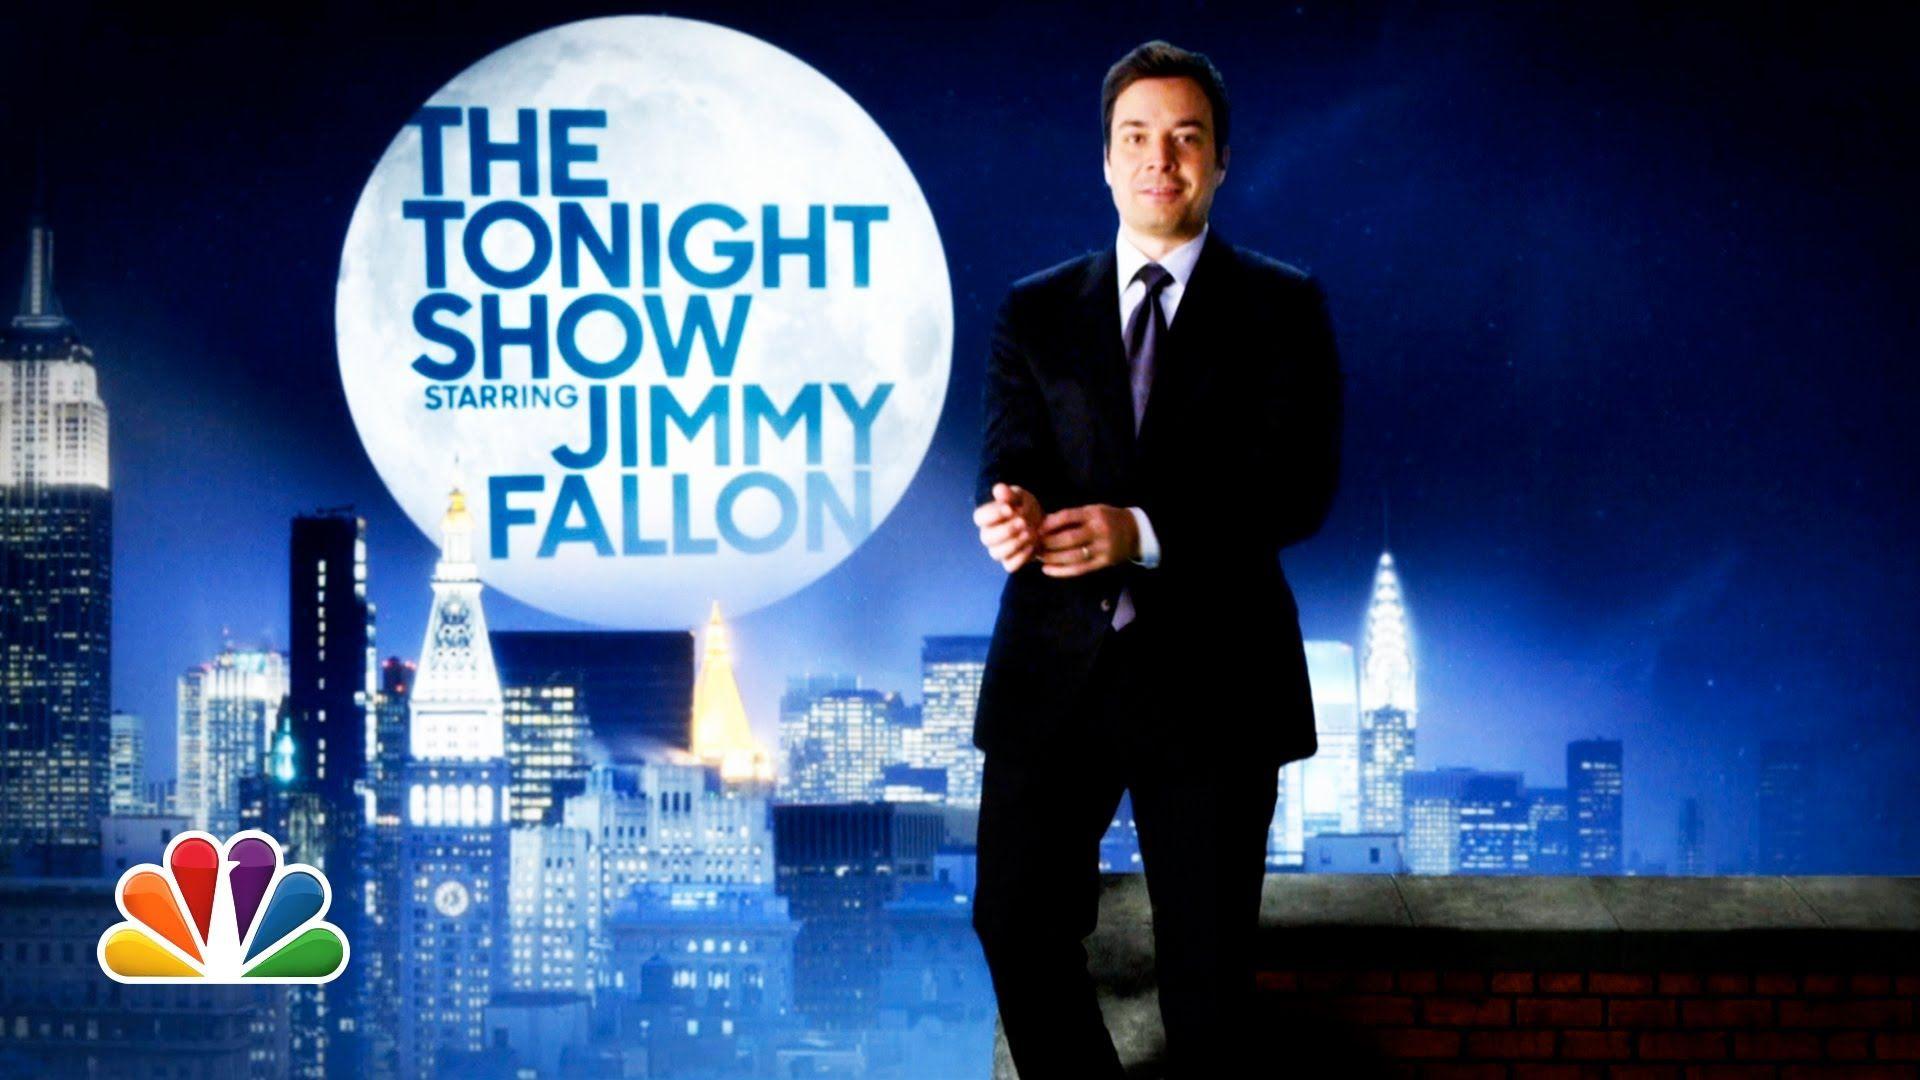 The Tonight Show Starring Jimmy Fallon Tradition Continues